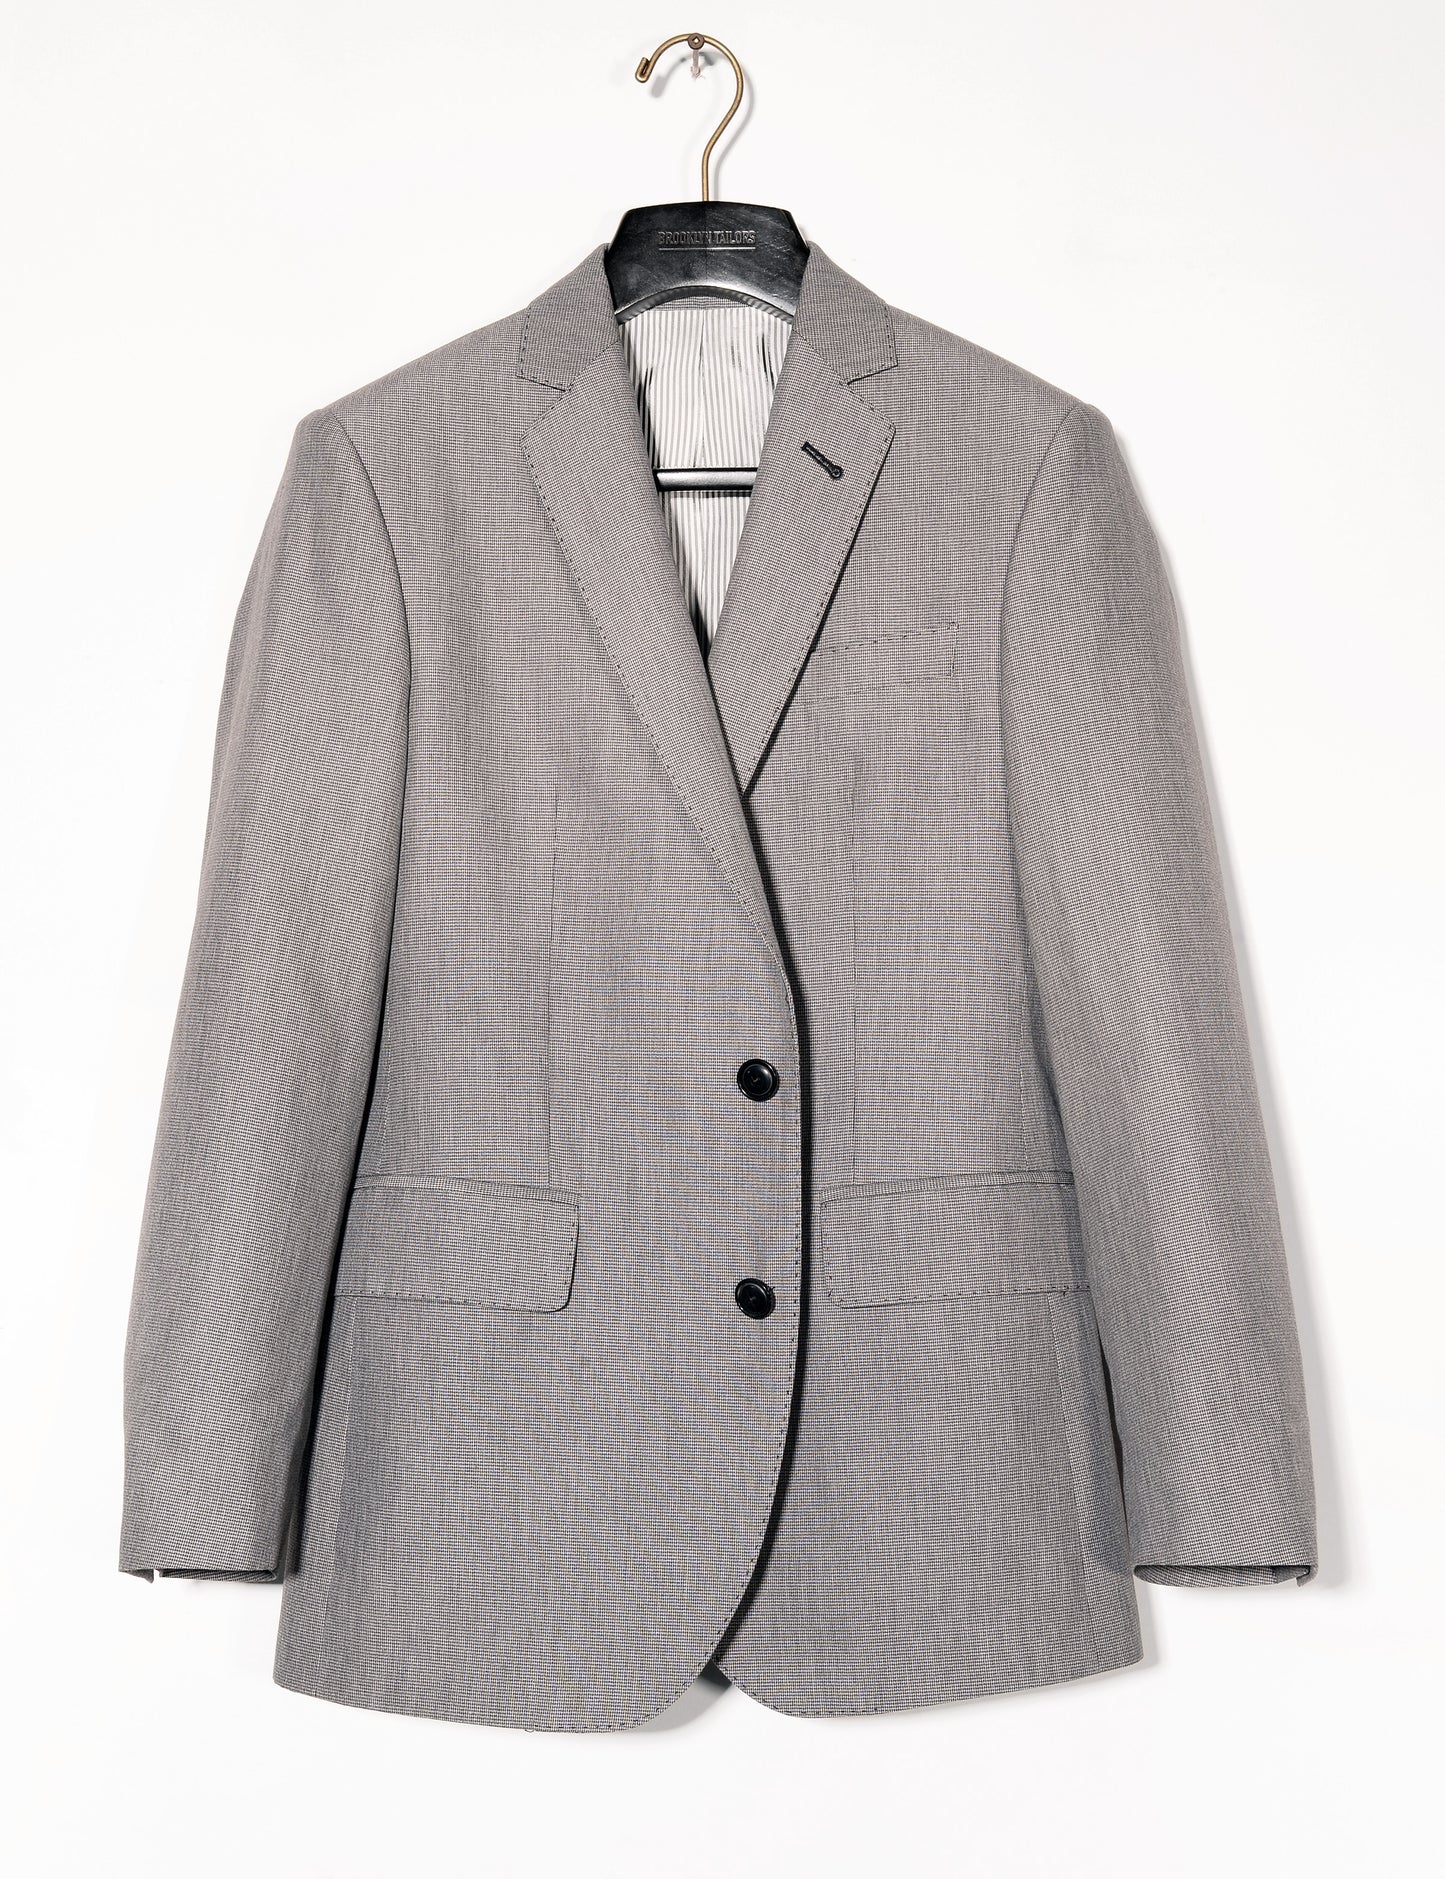 BKT50 Tailored Jacket in Cotton Micro Weave - Graphite